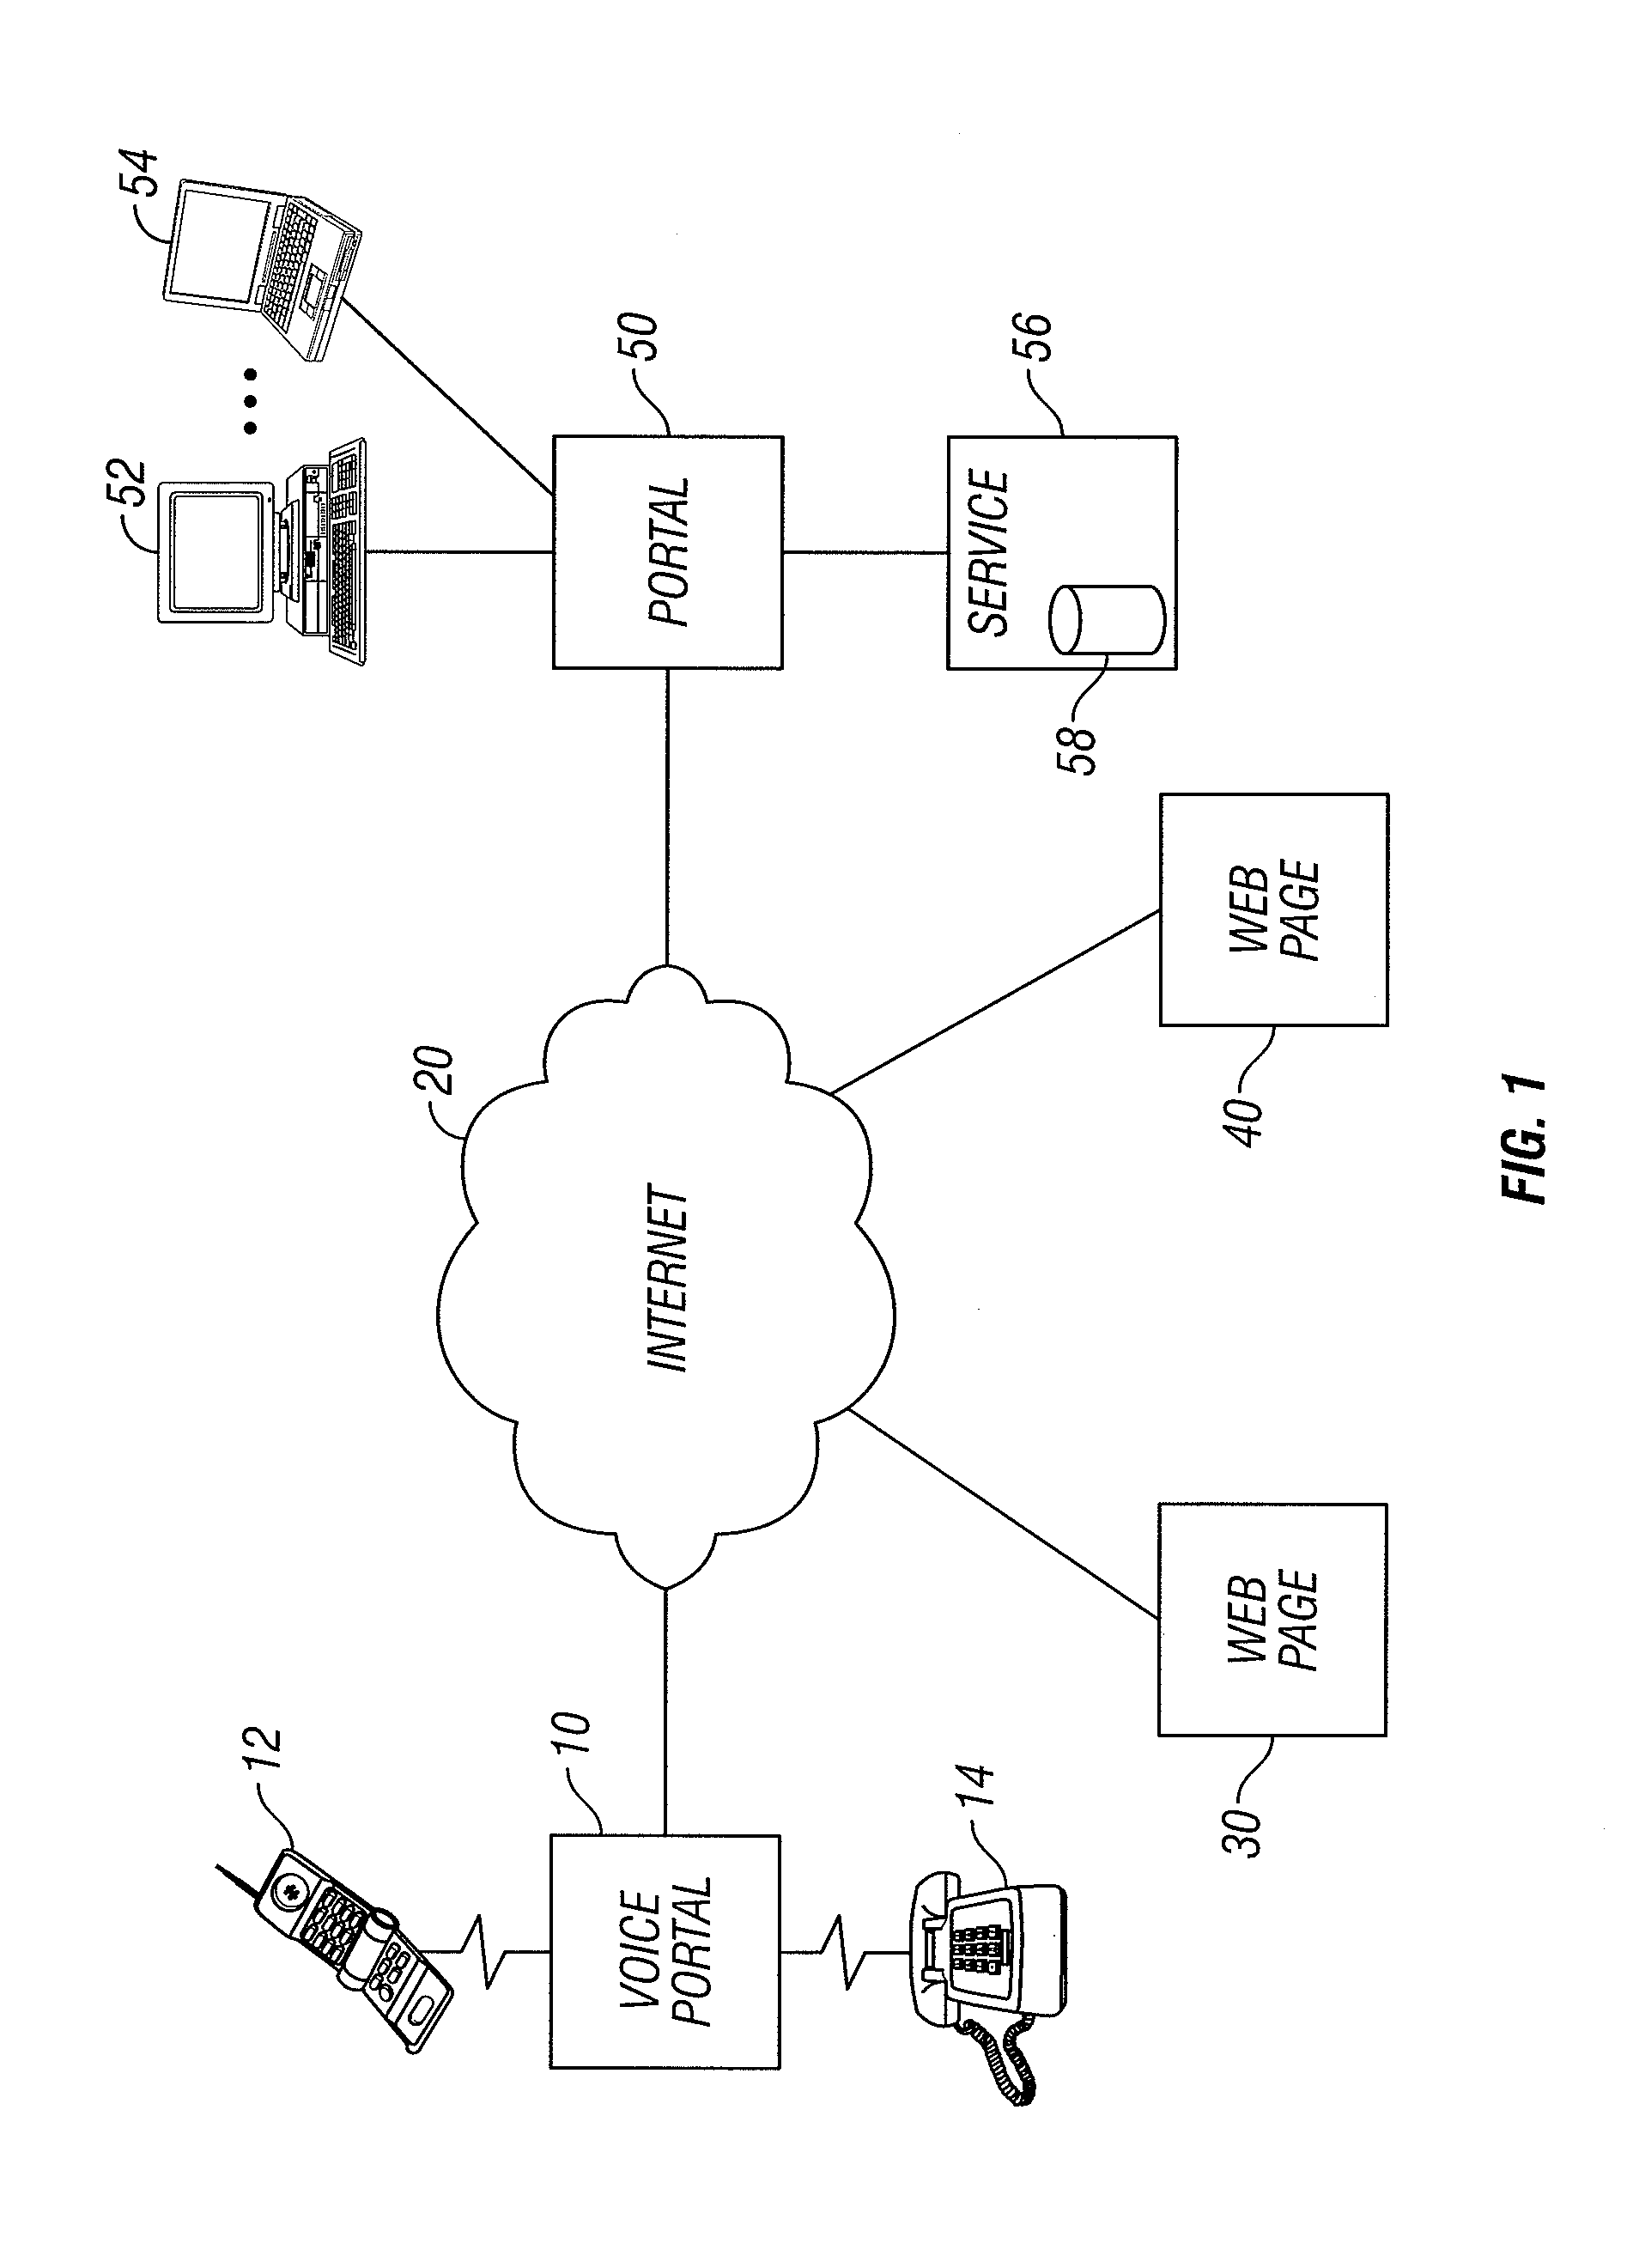 System and method for the transformation and canonicalization of semantically structured data